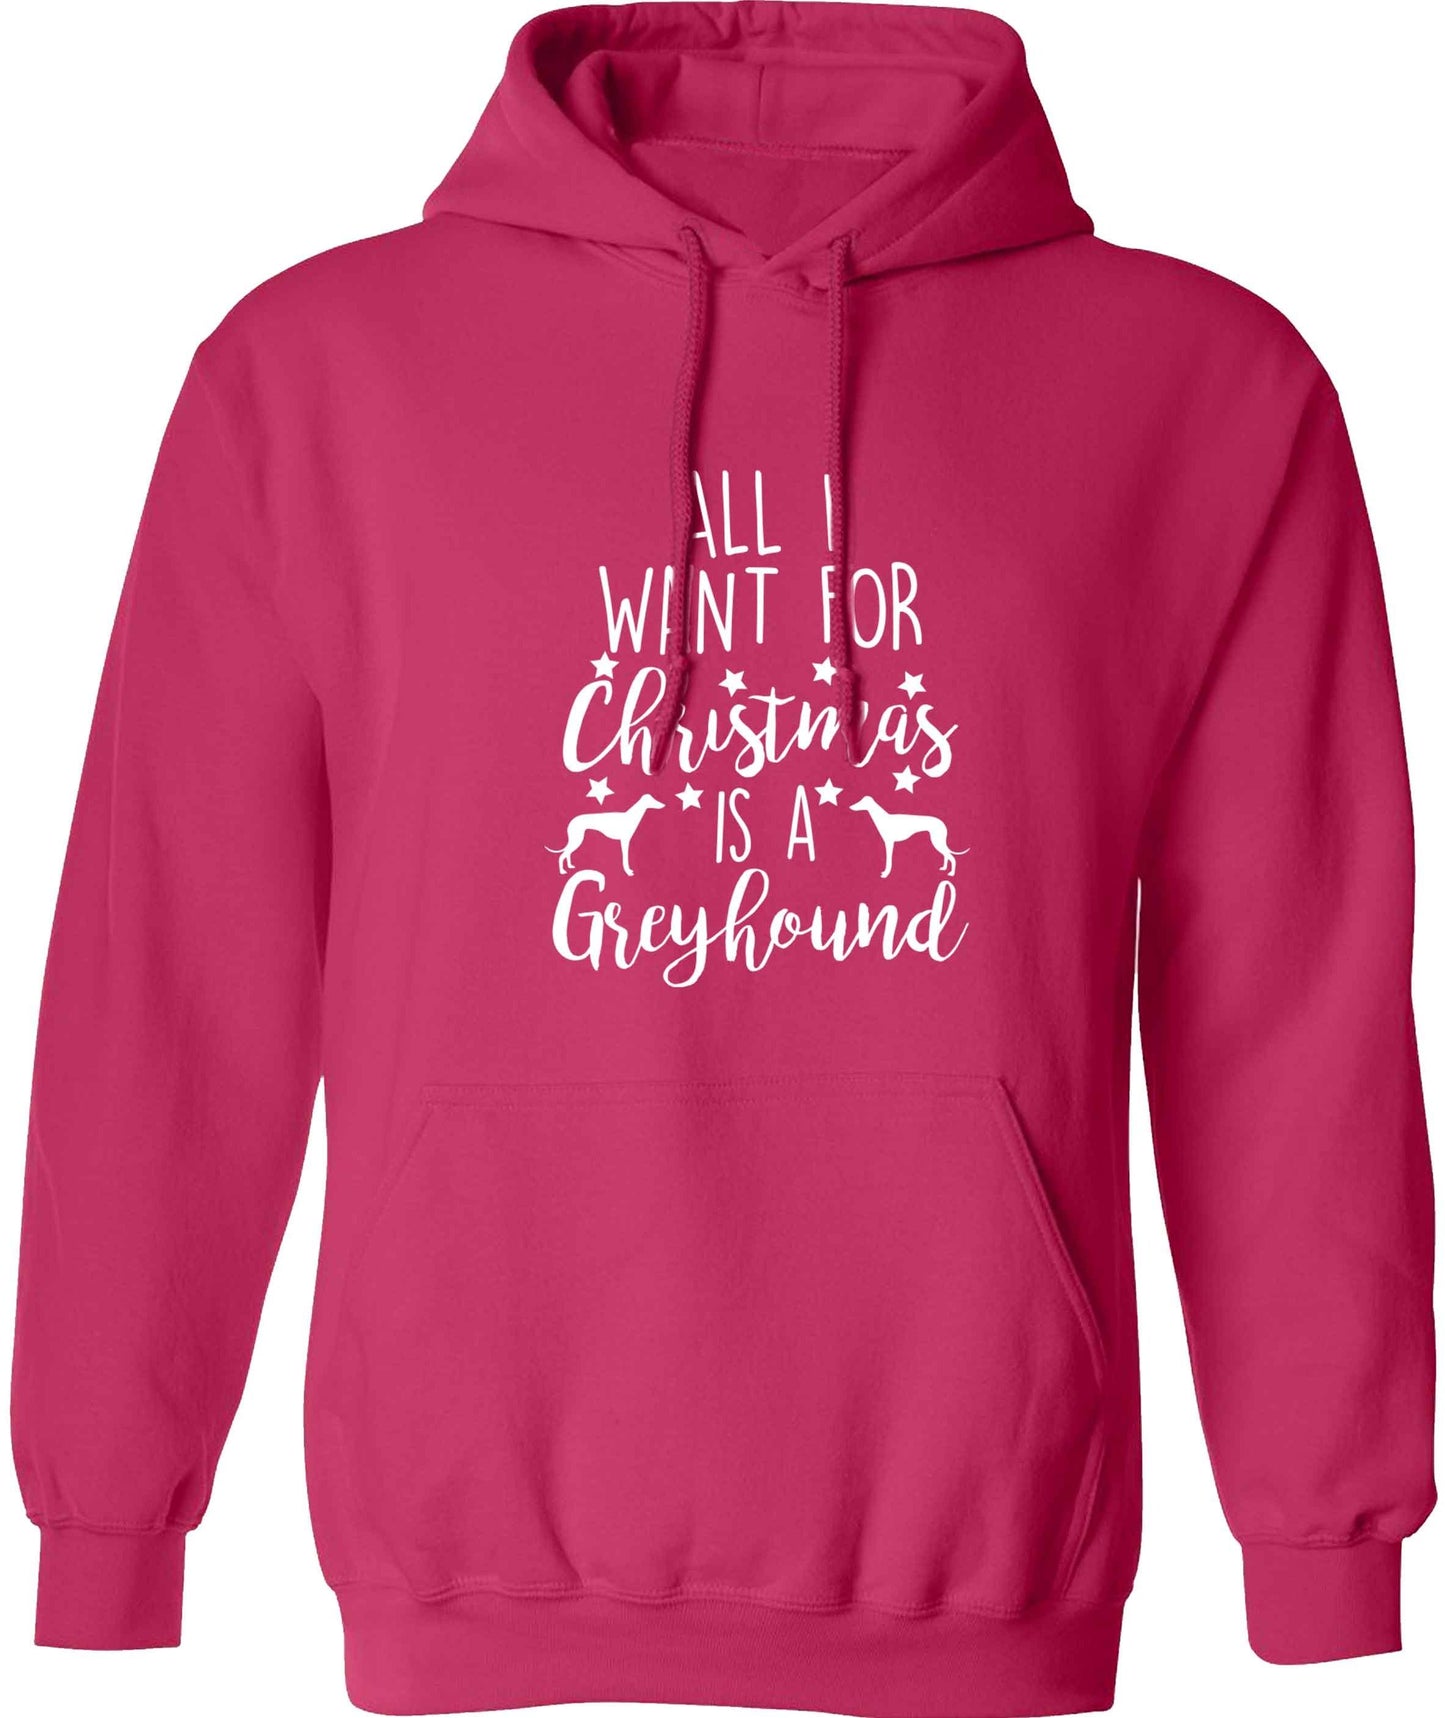 All I want for Christmas is a greyhound adults unisex pink hoodie 2XL